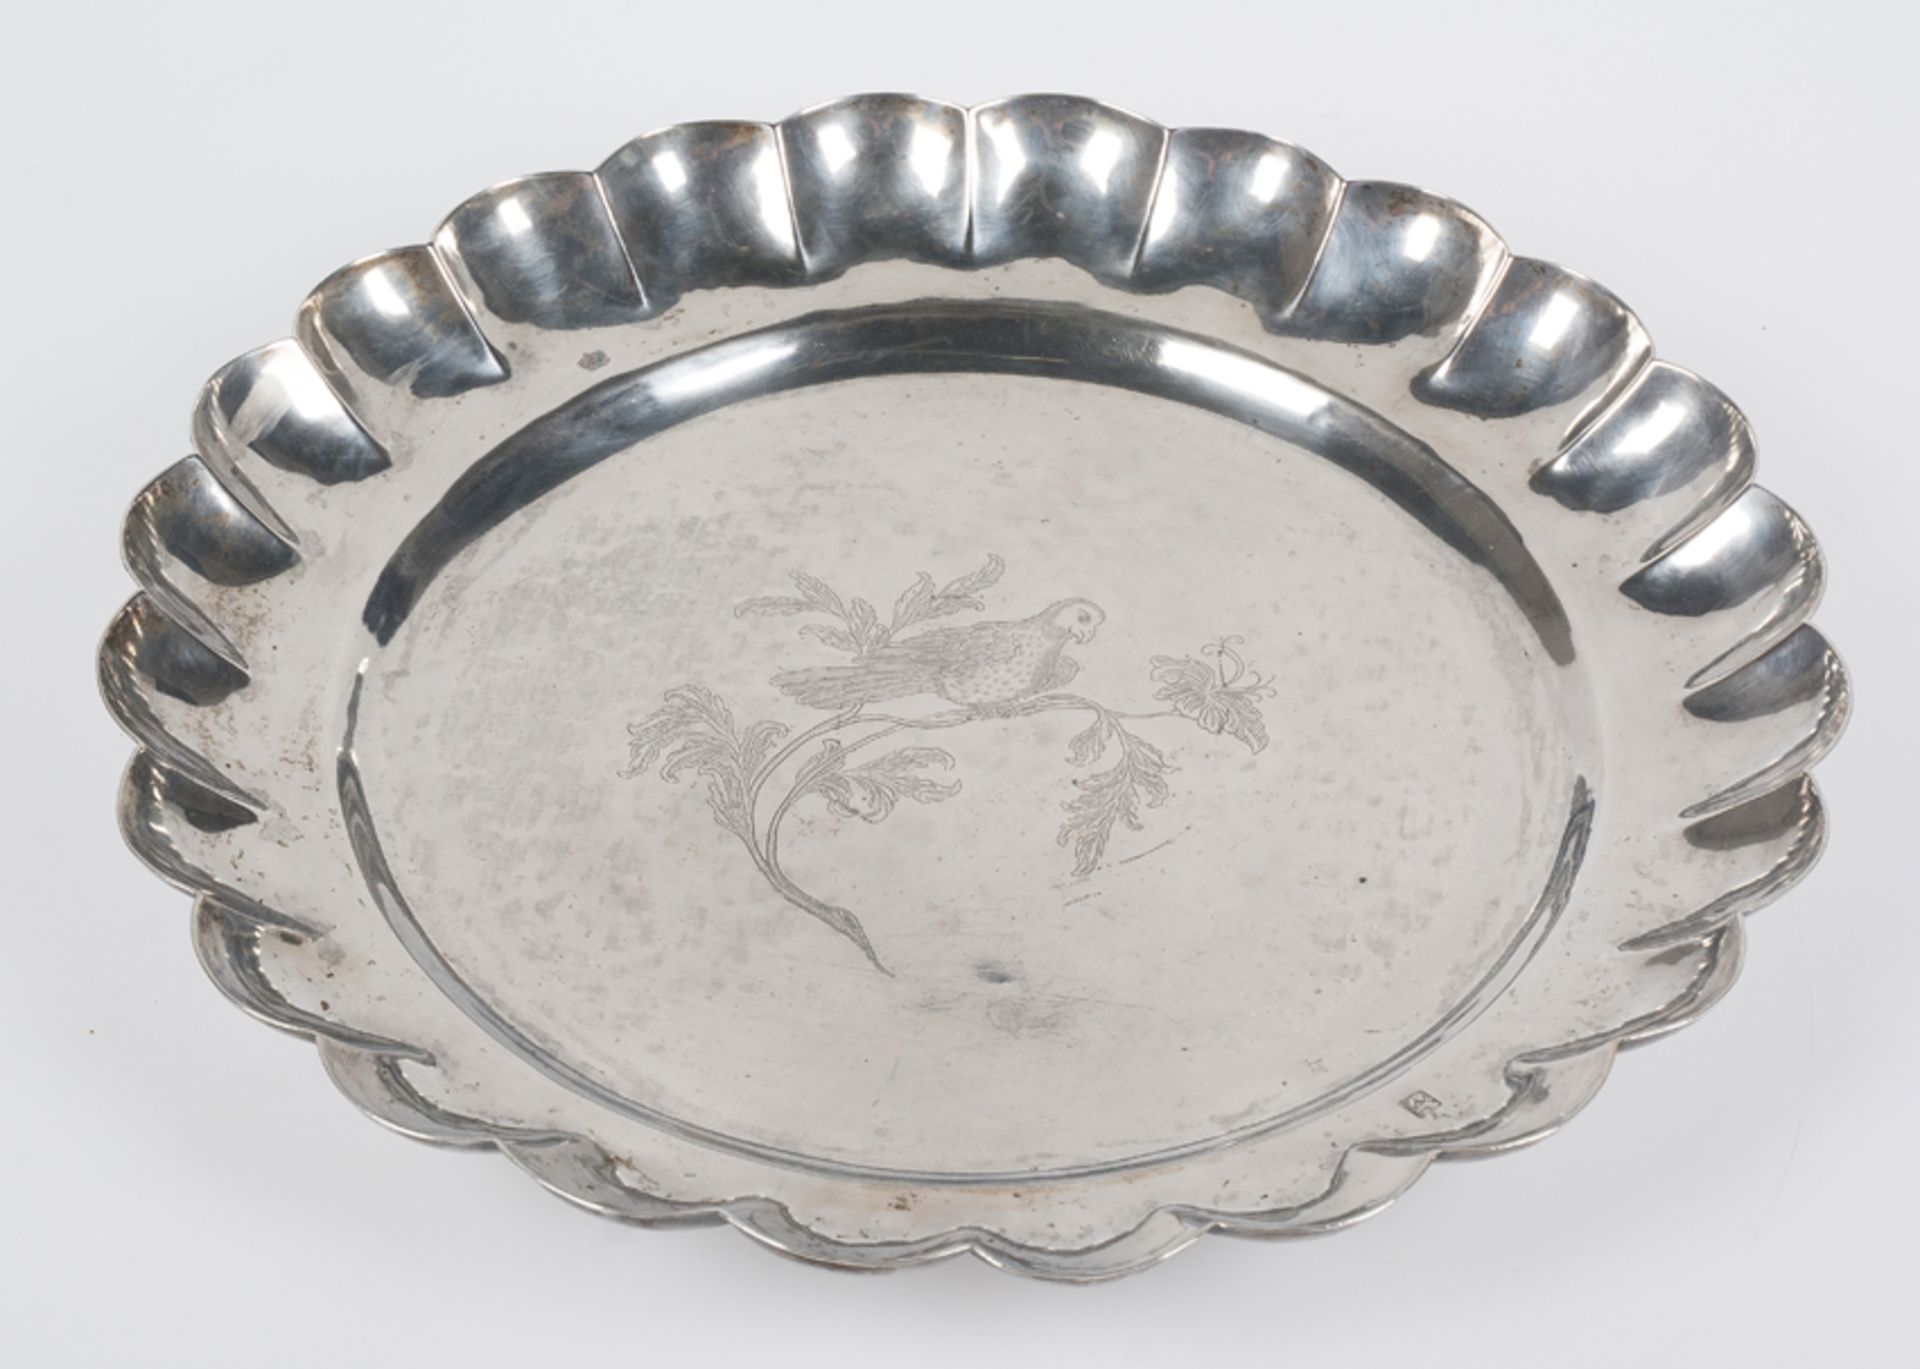 Large silver plate. Colonial work. Possibly Guatemala or Leon, Nicaragua. 18th century. - Bild 2 aus 6